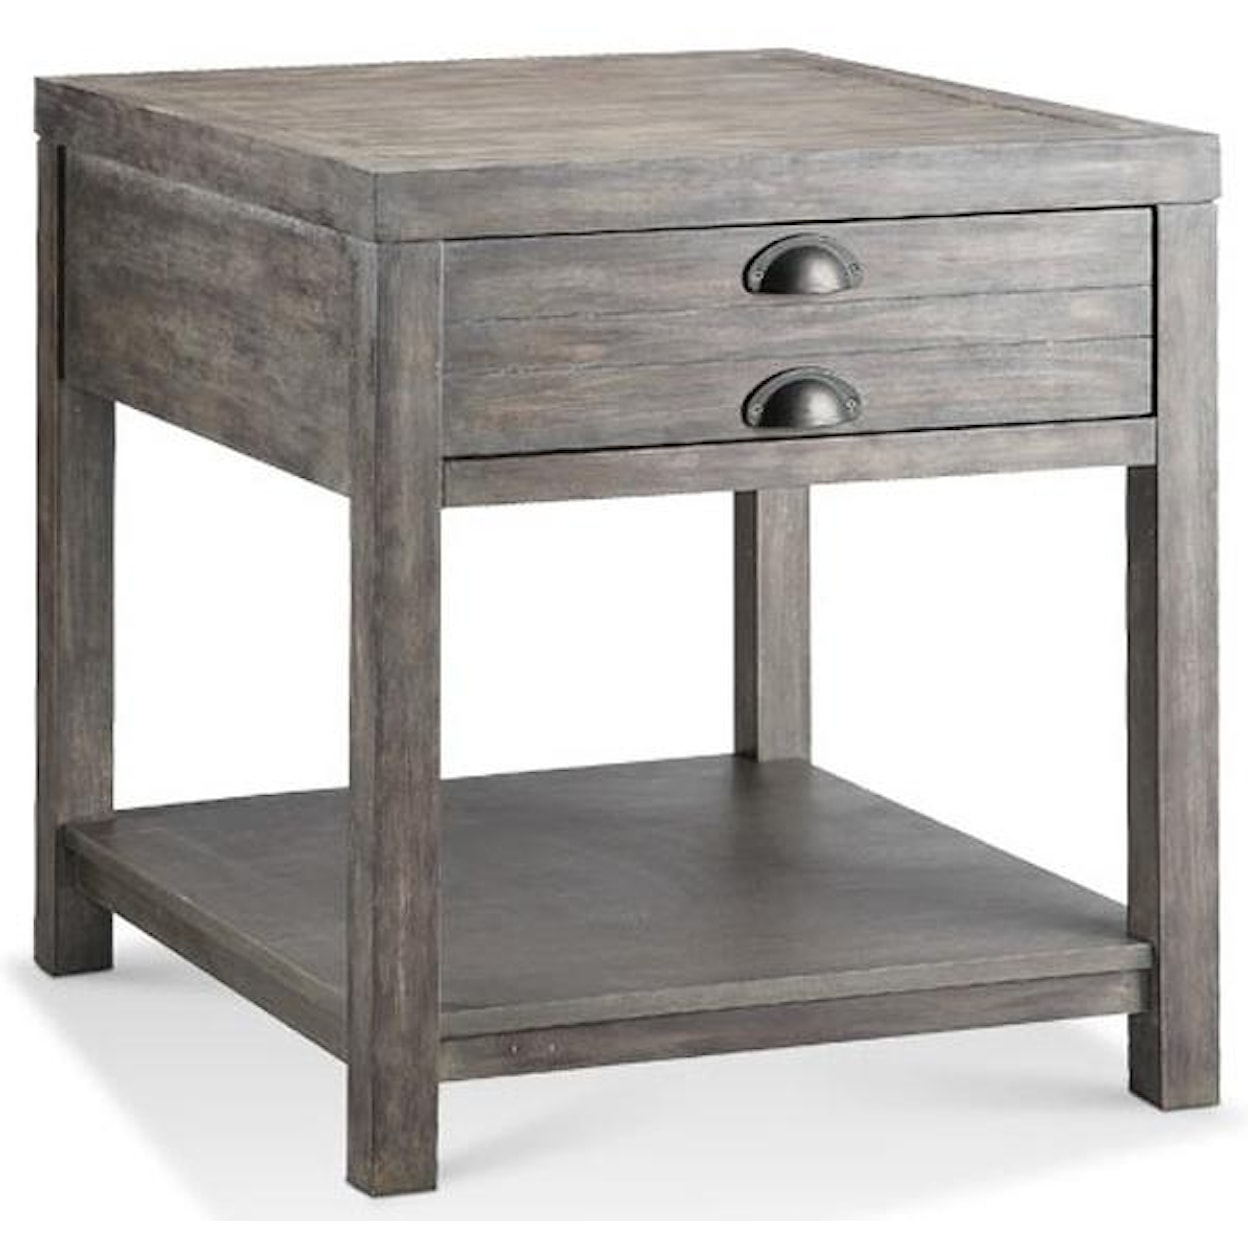 Stein World Accent Tables Bridgeport Rectangle End Table